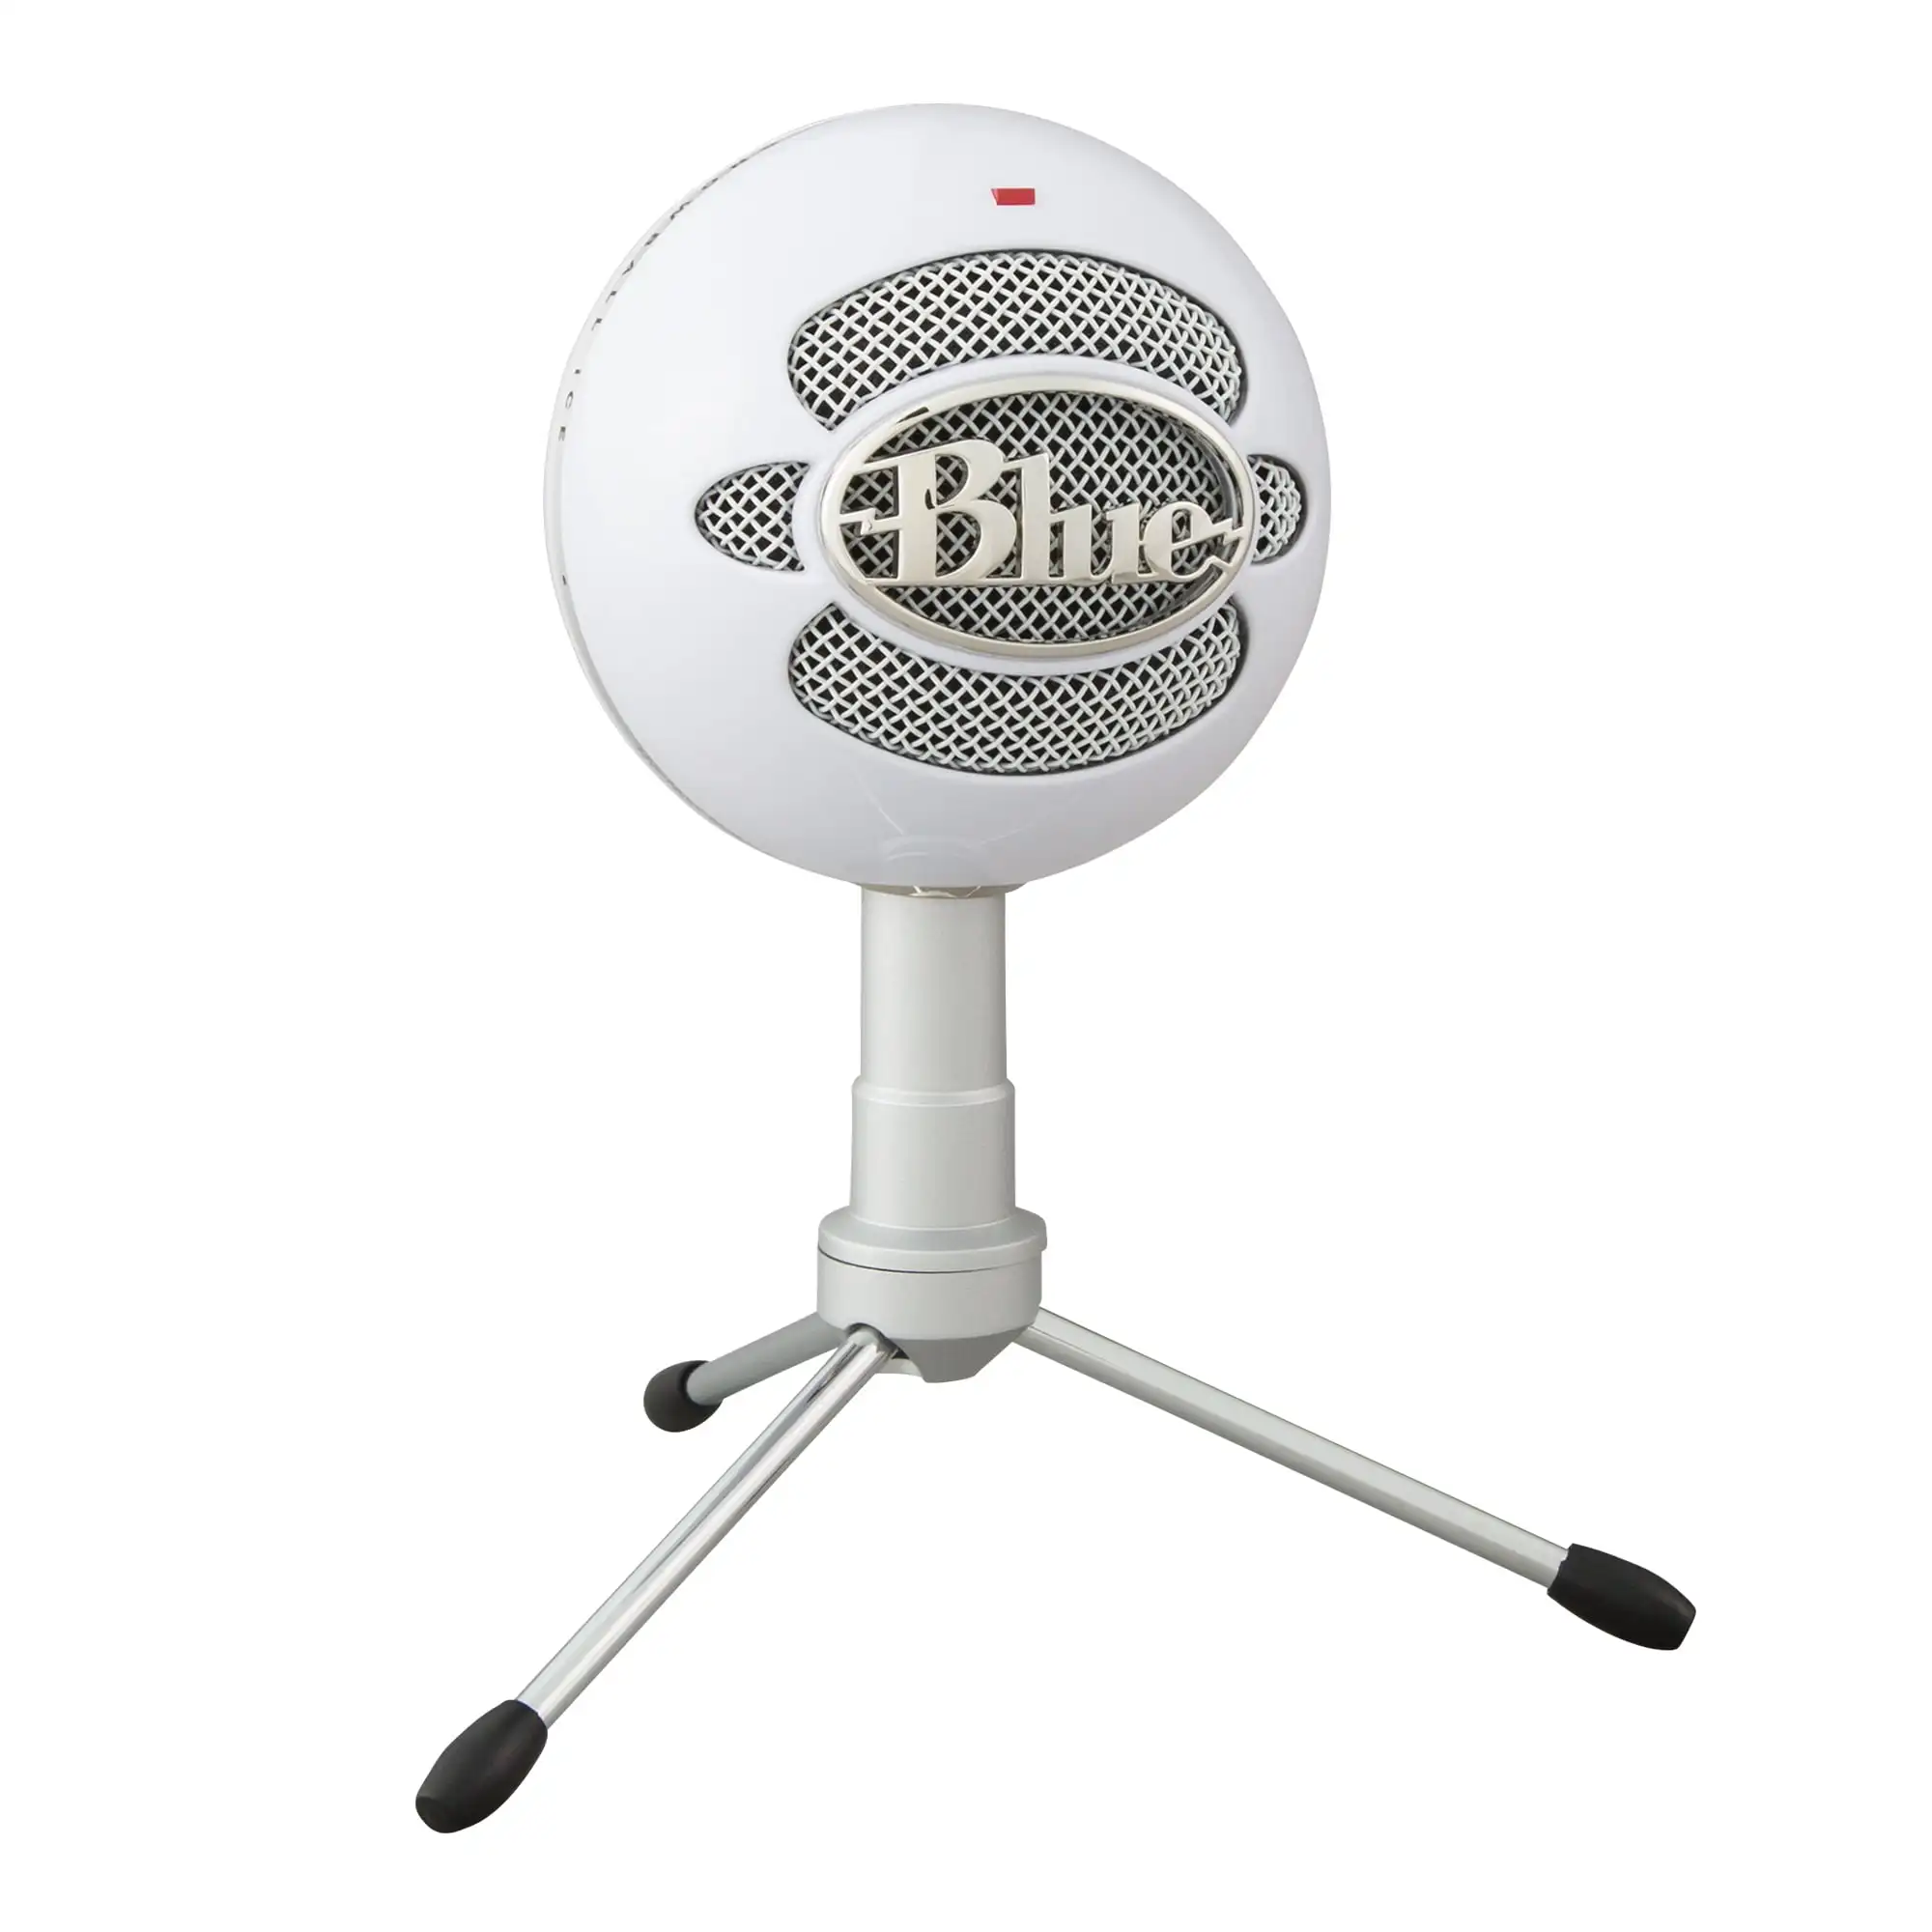 Enlarge Plug 'n Play USB Microphone for Recording, Streaming, Podcasting, Gaming on PC, Adjustable Desktop Stand and USB cable